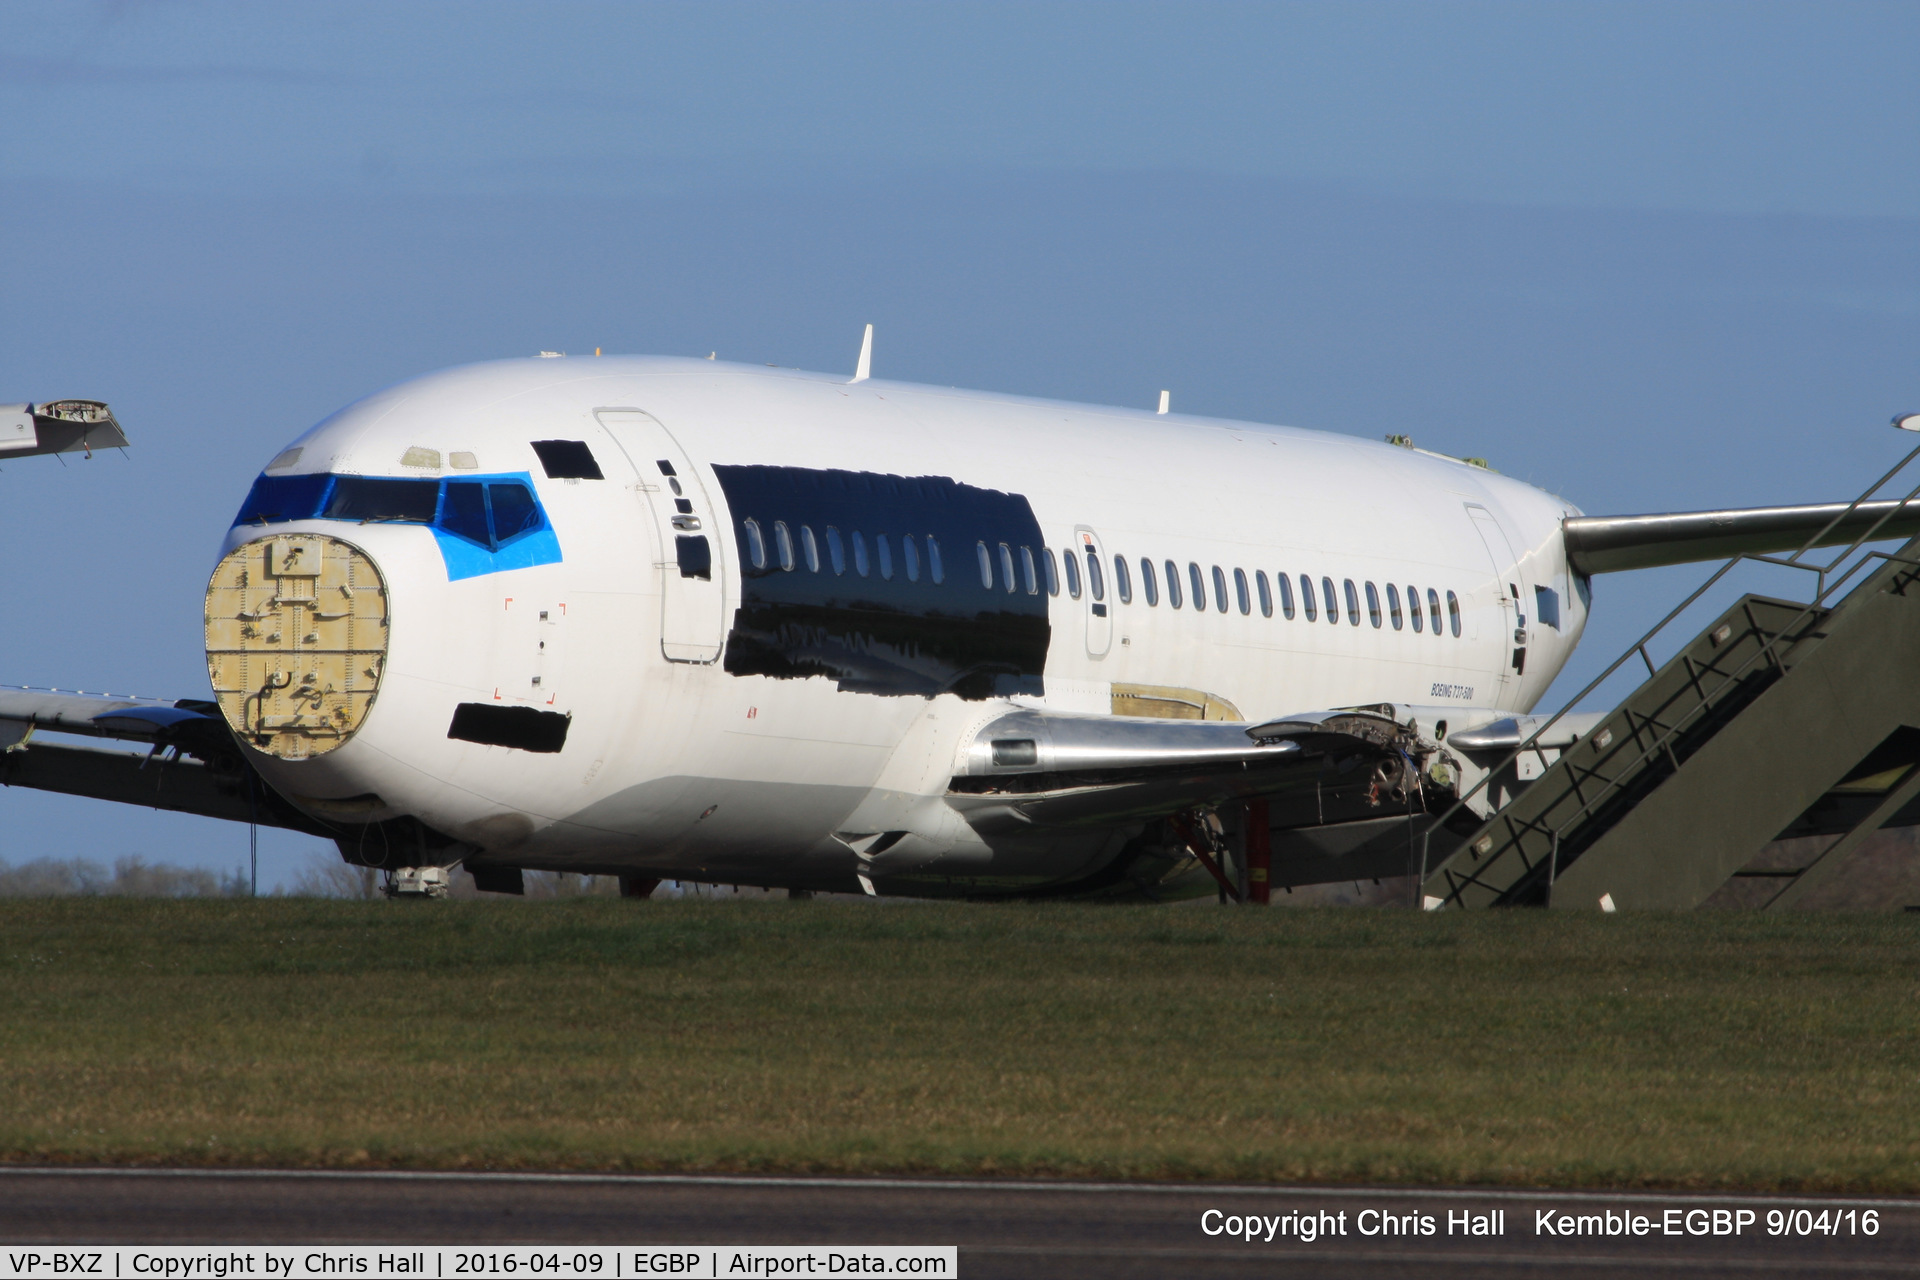 VP-BXZ, 1994 Boeing 737-524 C/N 27329, ex UTair Aviation, in scrapping area at Kemble